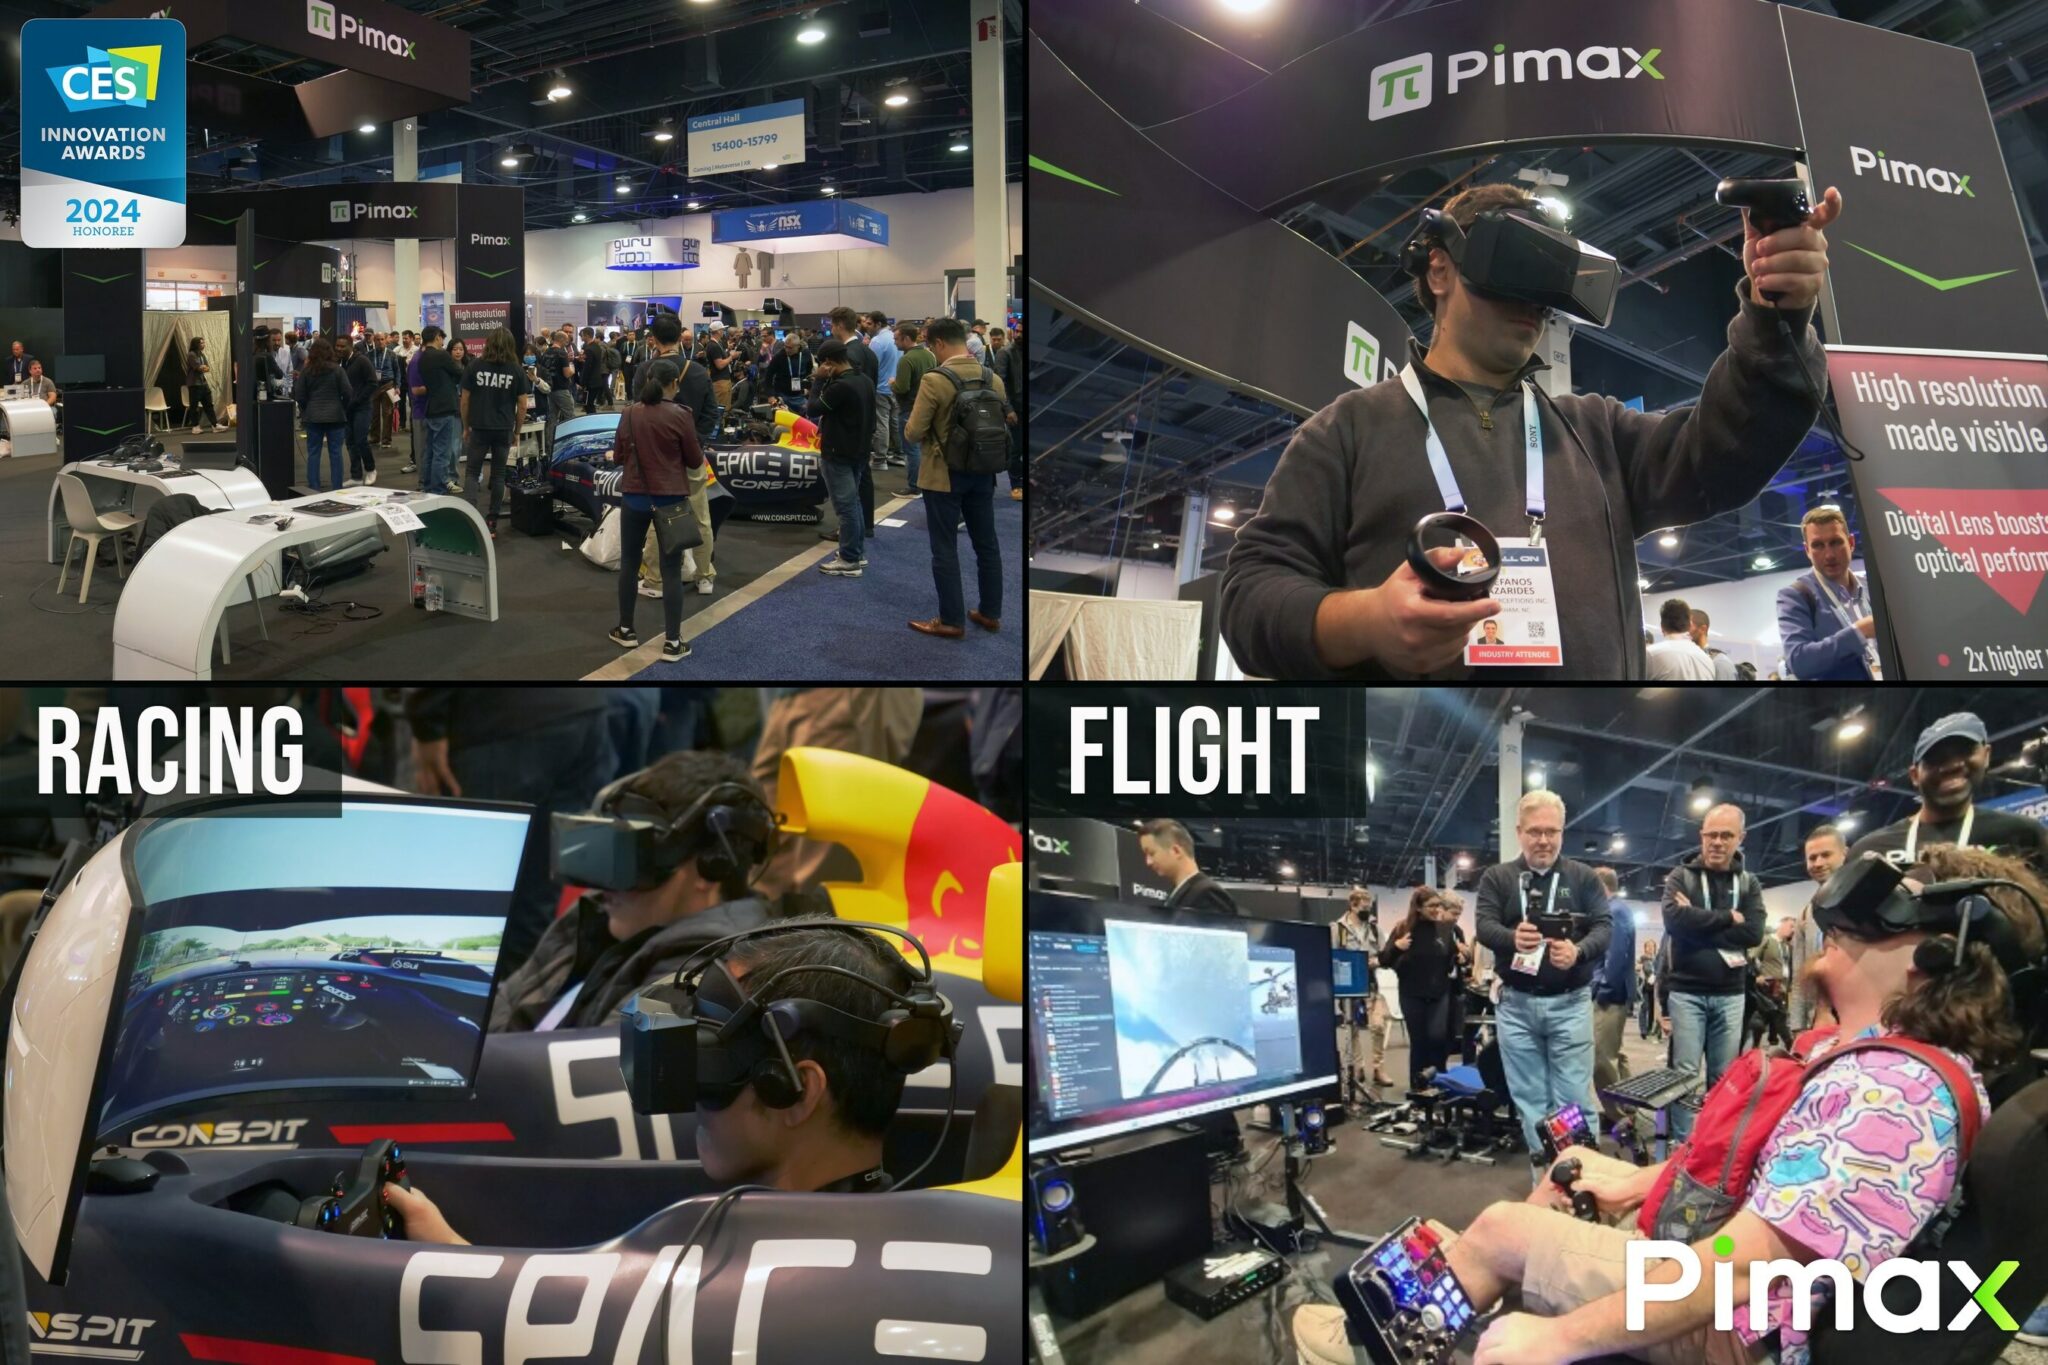 Pimax On Site Demo With Flight Racing Sim Rigs At CES 2024 2048x1365 